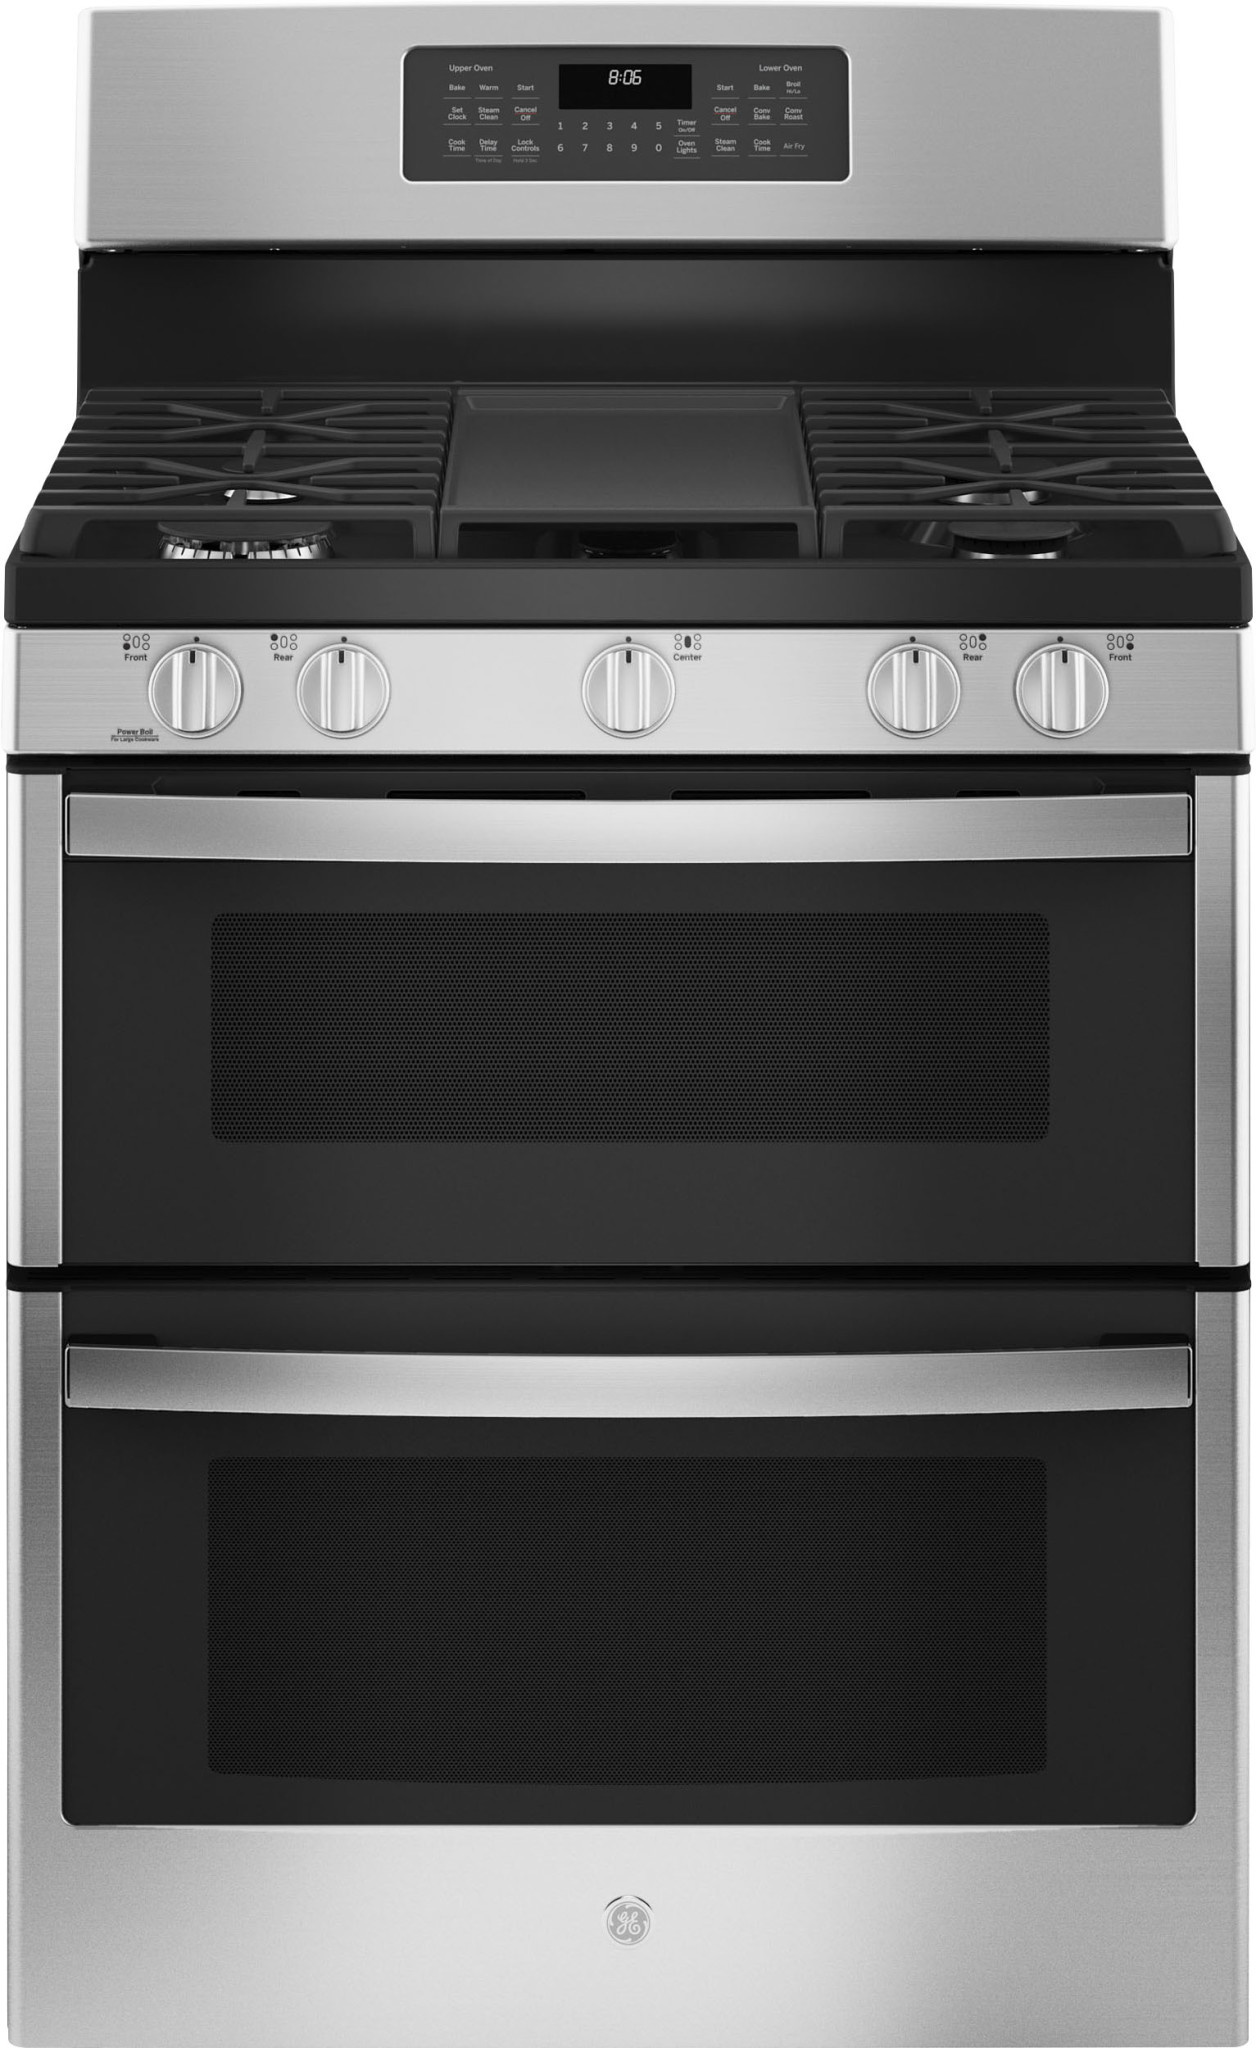 GE *GE  WGG745SFS  6.8 Cu. Ft. Freestanding Double-Oven Gas Convection Range with Self-Steam Cleaning and No-Preheat Air Fry - Stainless steel